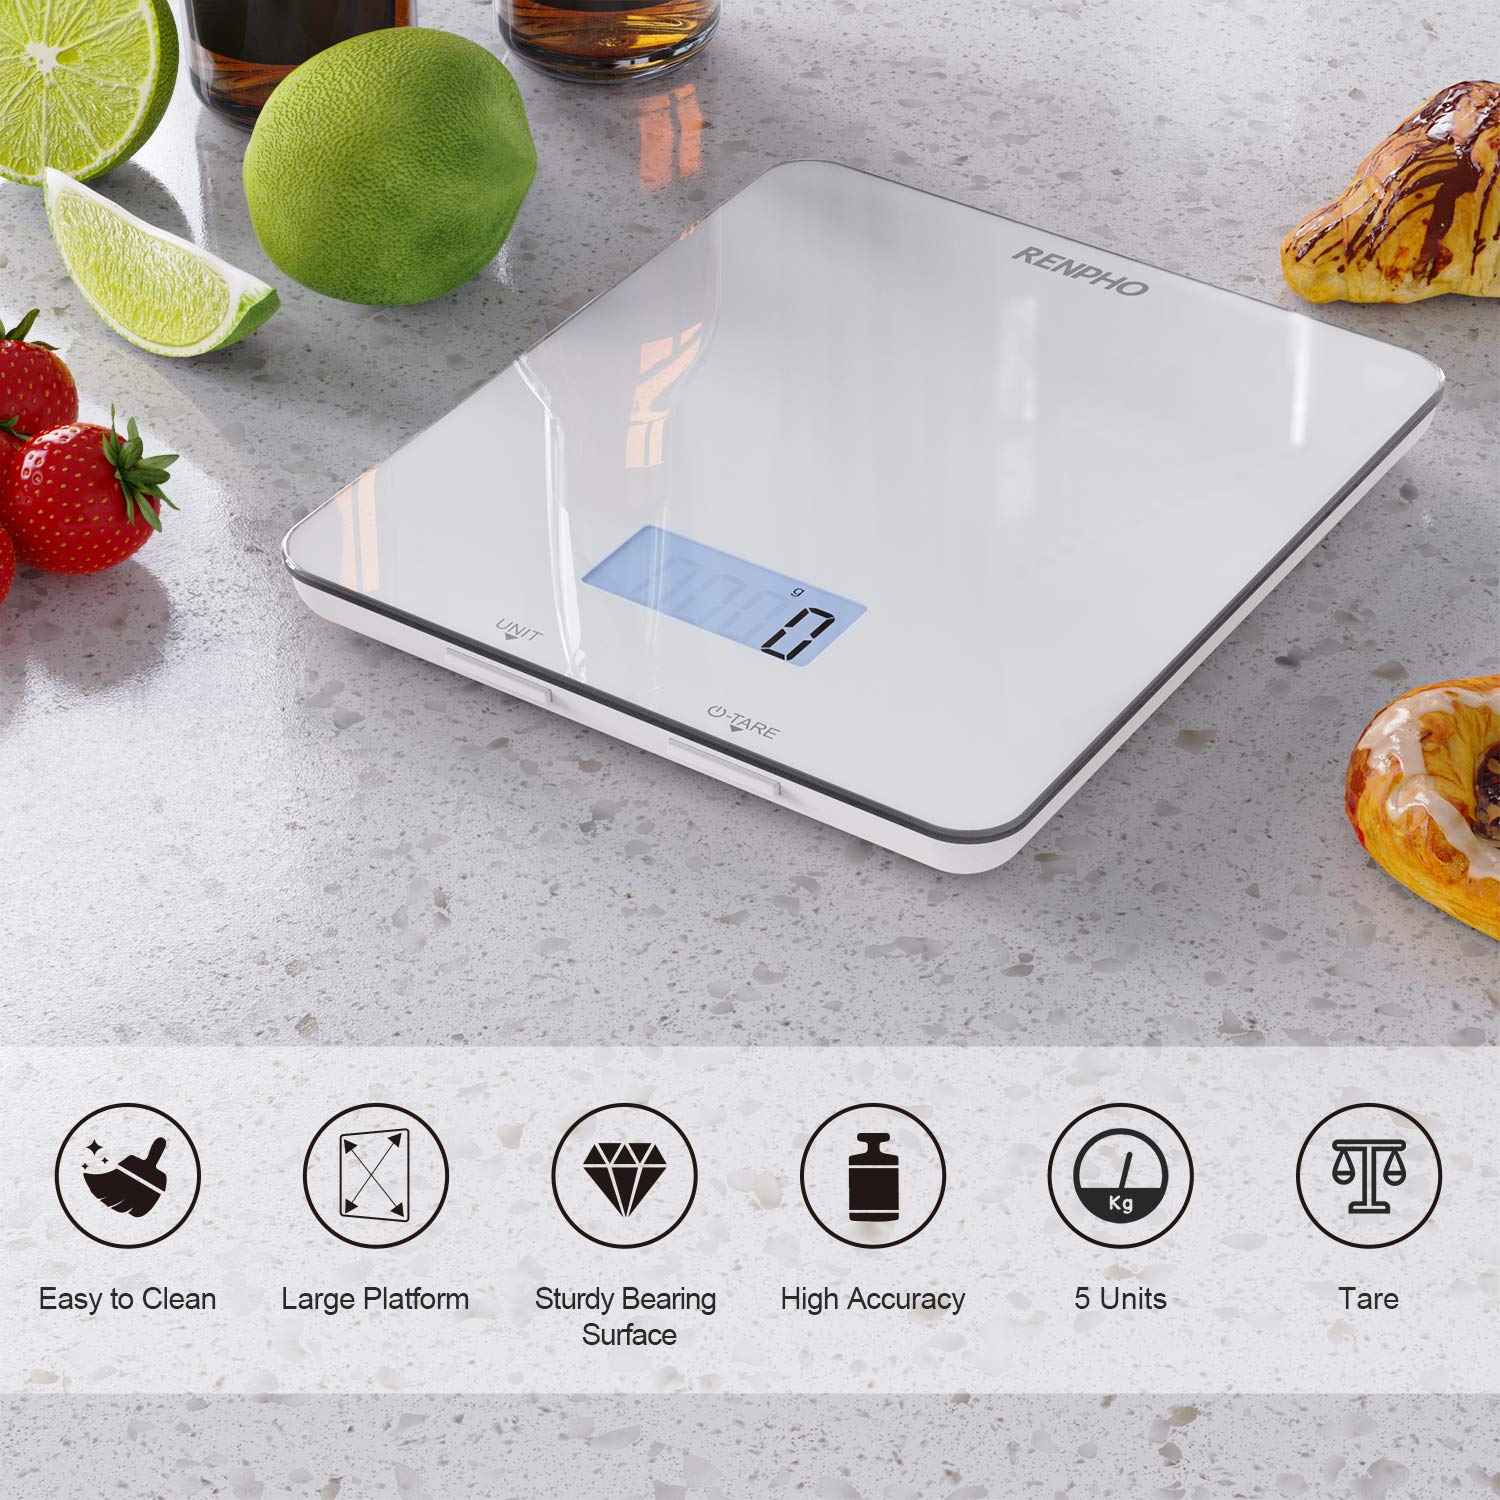 RENPHO Digital Food Scale Kitchen Scale Cooking Nutritional Calculator with App